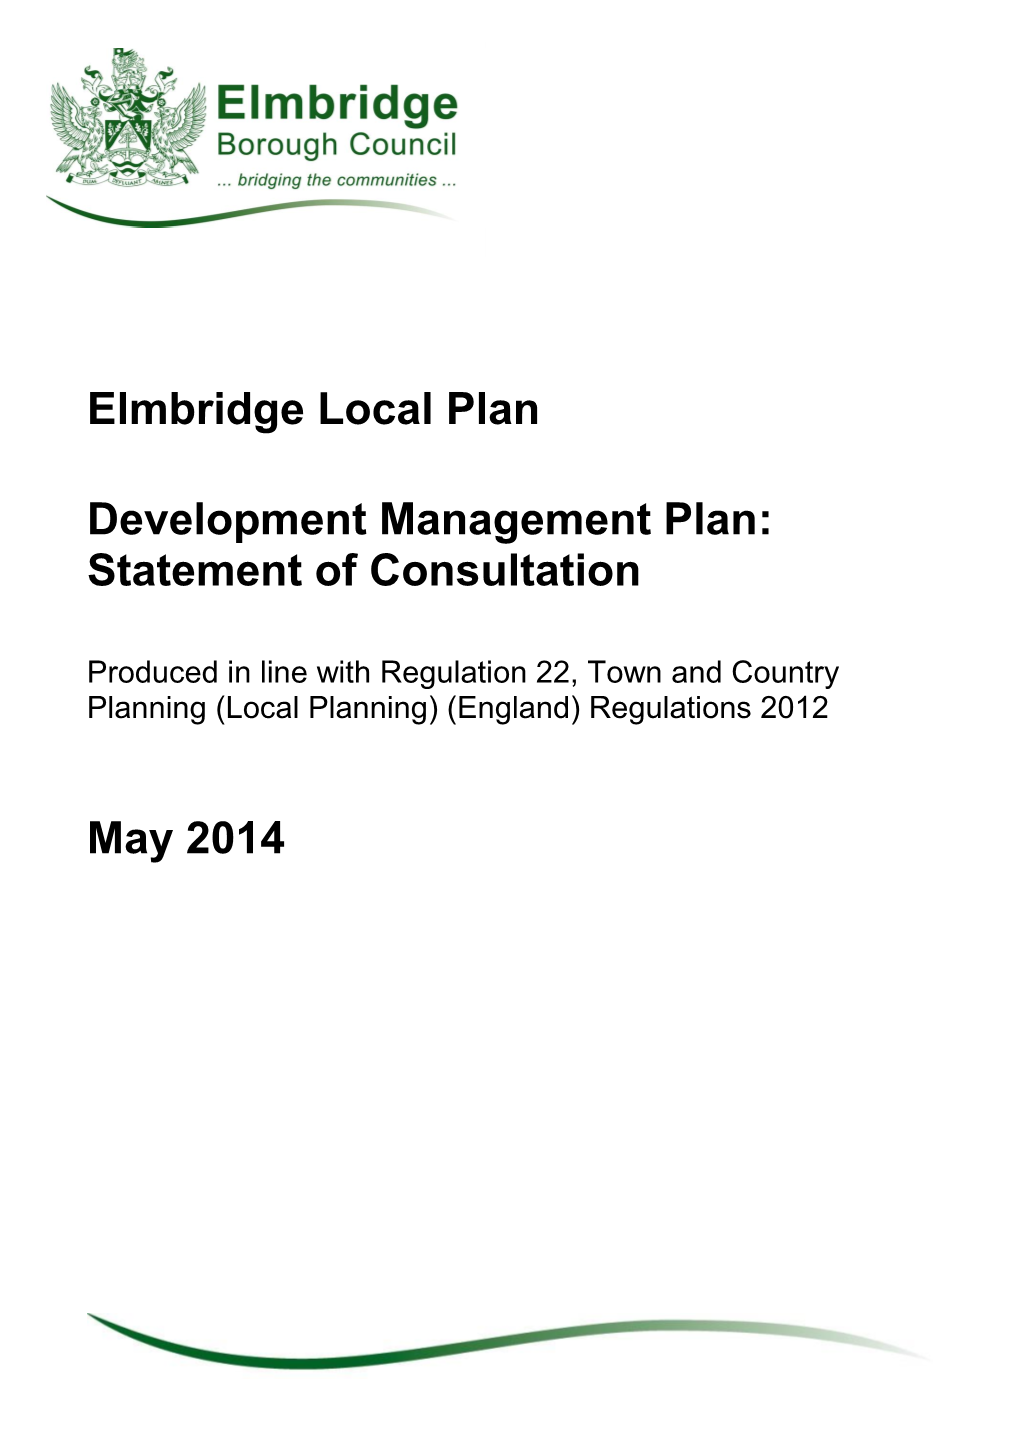 Statement of Consultation May 2014